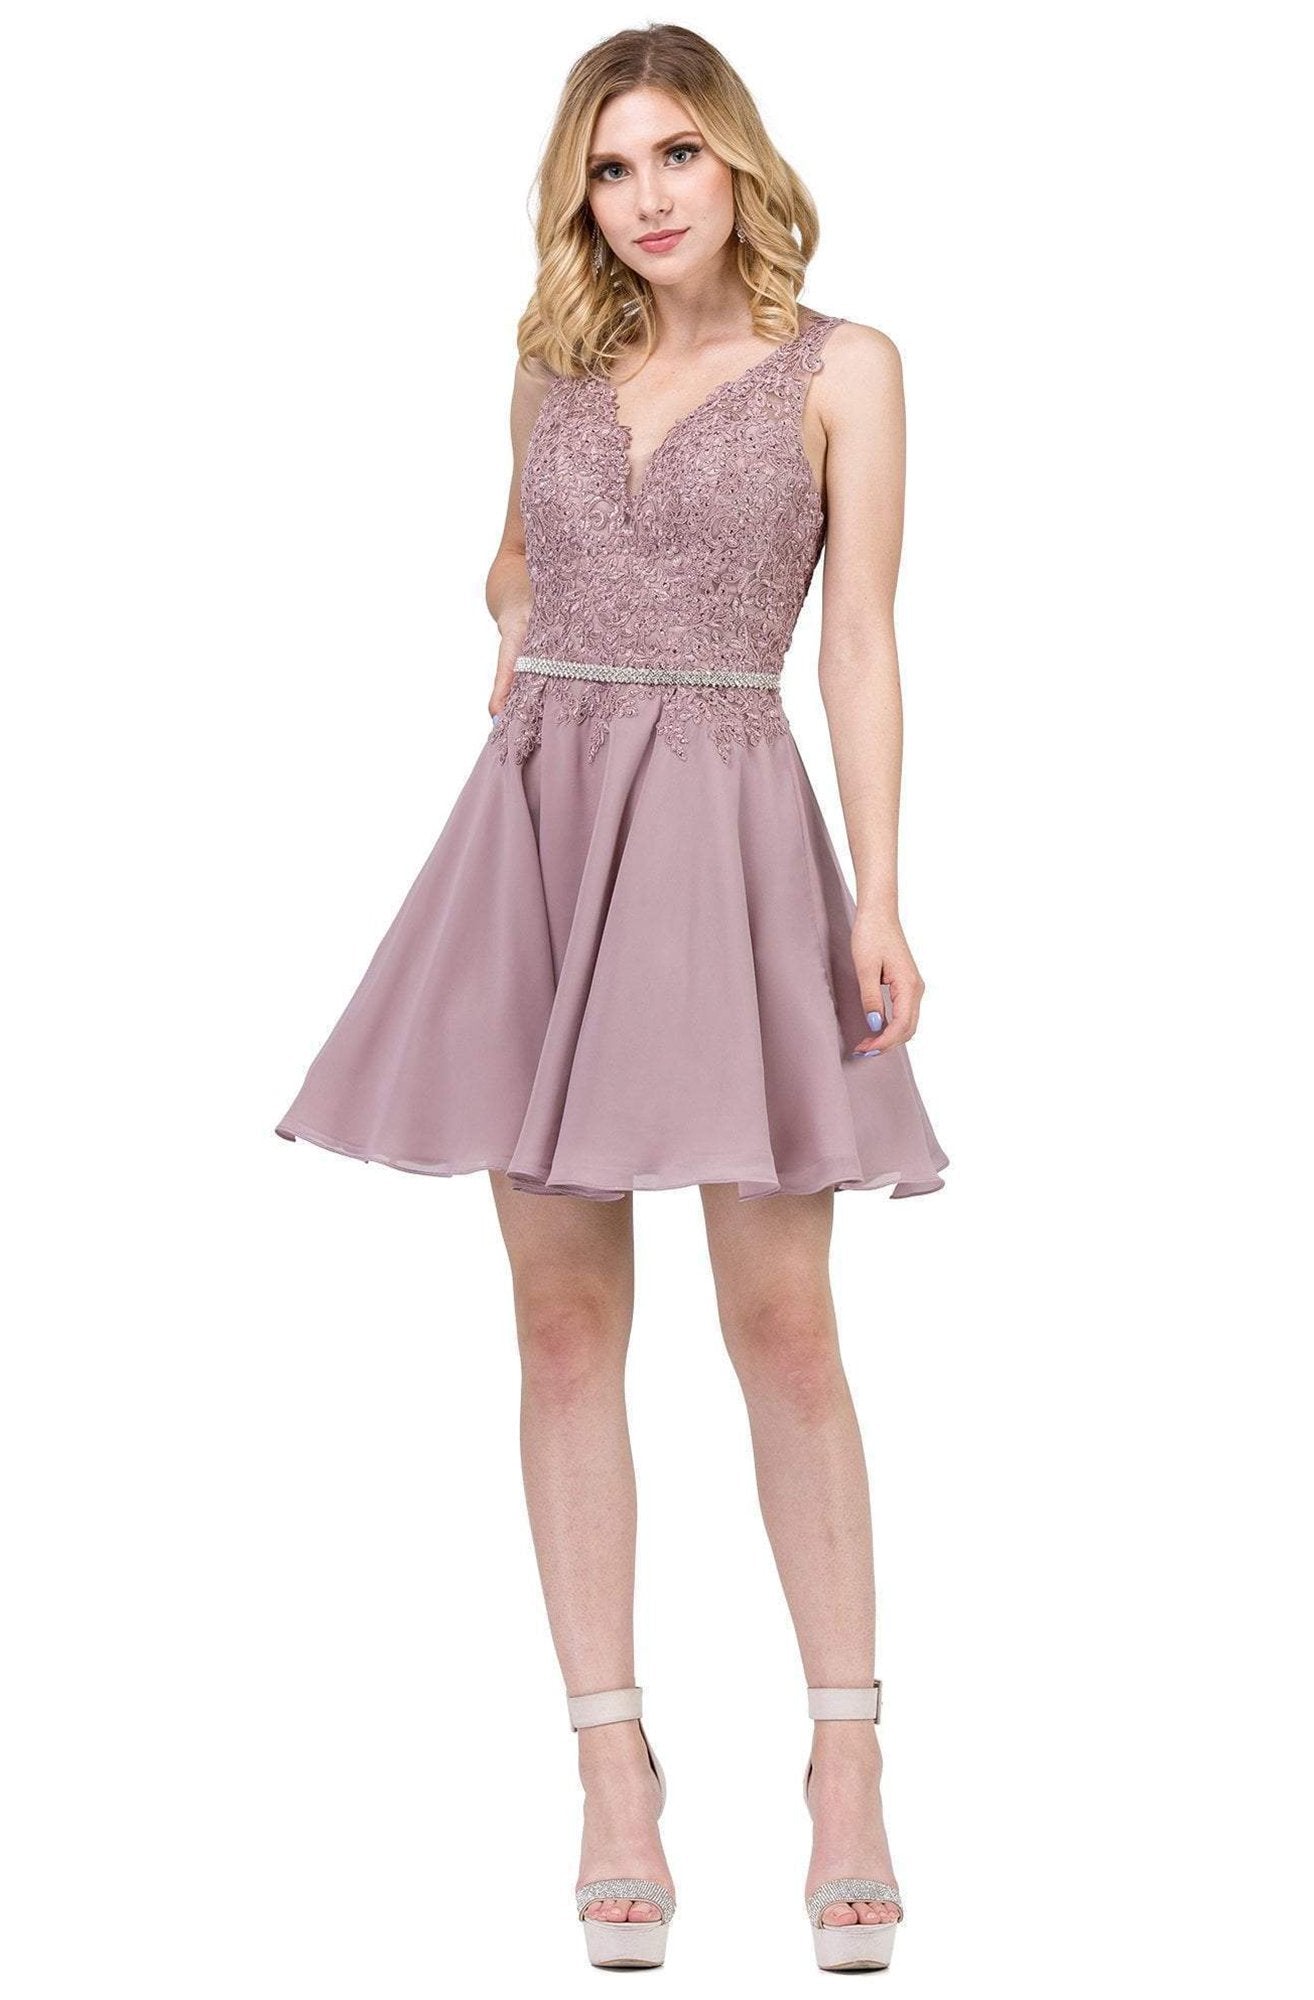 Dancing Queen - 3011 Plunging V-Neck Lace Bodice Homecoming Dress in Pink